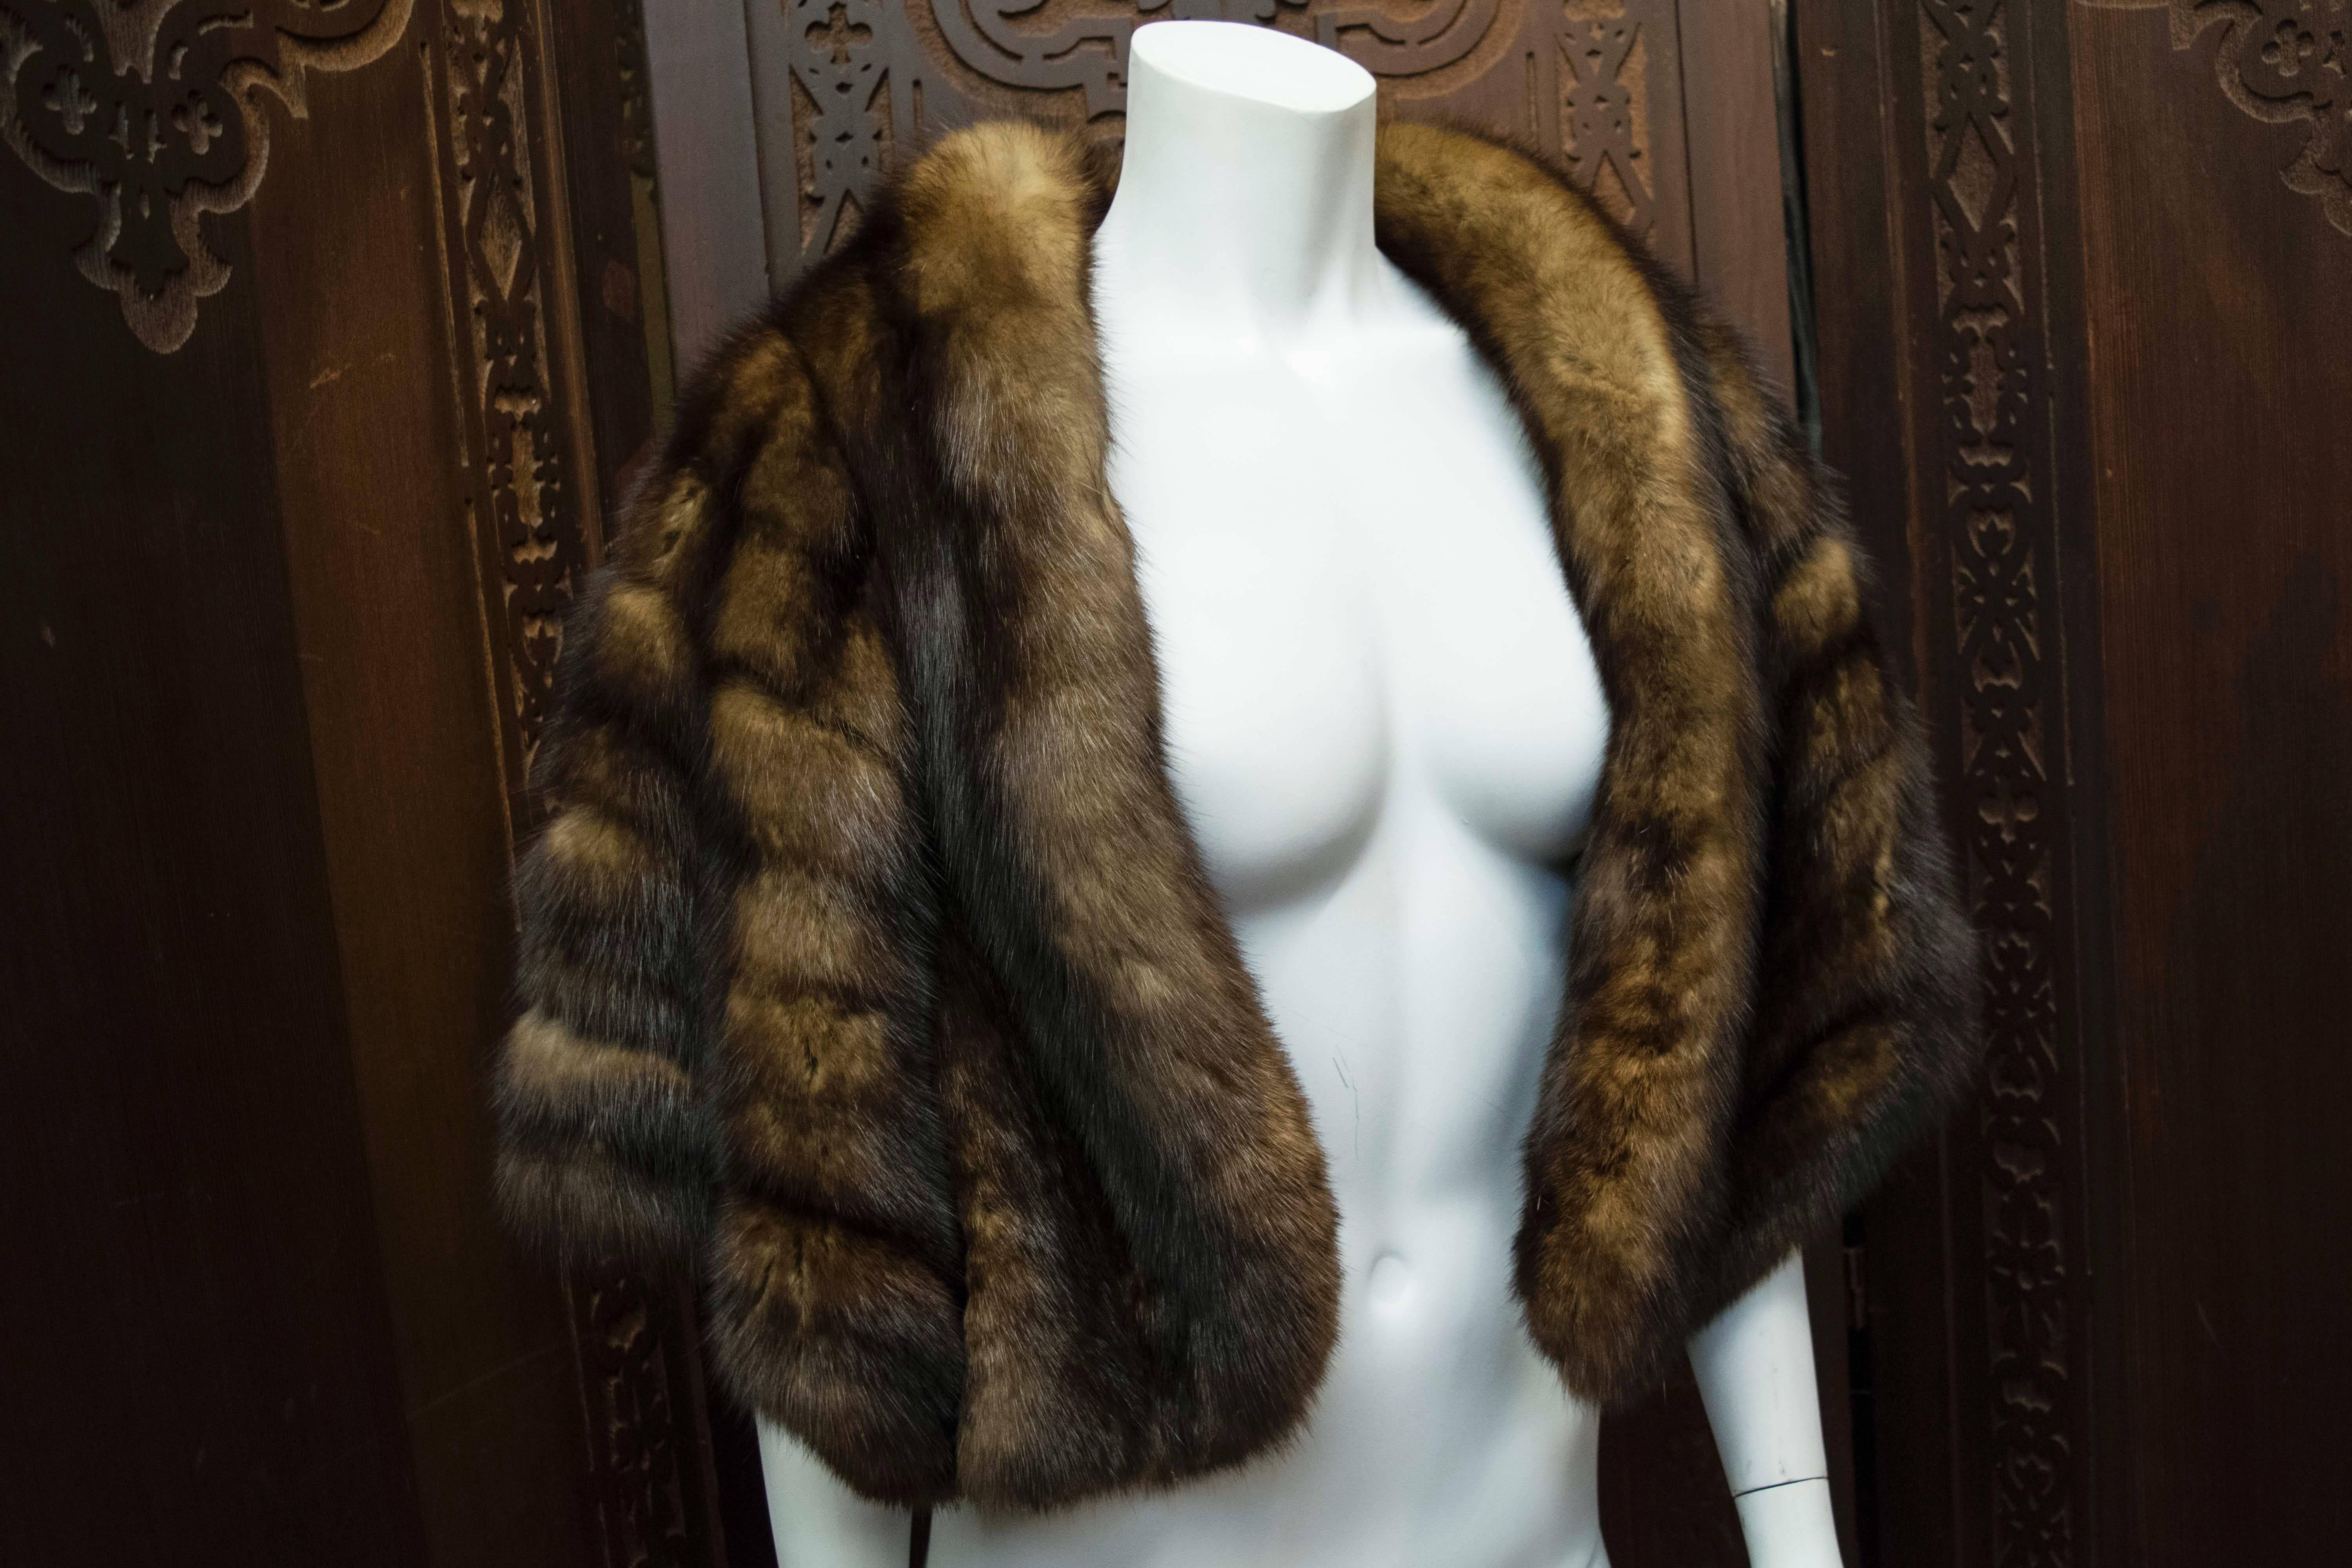 1950s Sable Fur Wrap

Gorgeous soft and rare Sable fur wrap. Sable fur has been a highly valued item in the fur trade since the early Middle Ages, and is generally considered to have the most beautiful and richly tinted pelt among martens. Sable